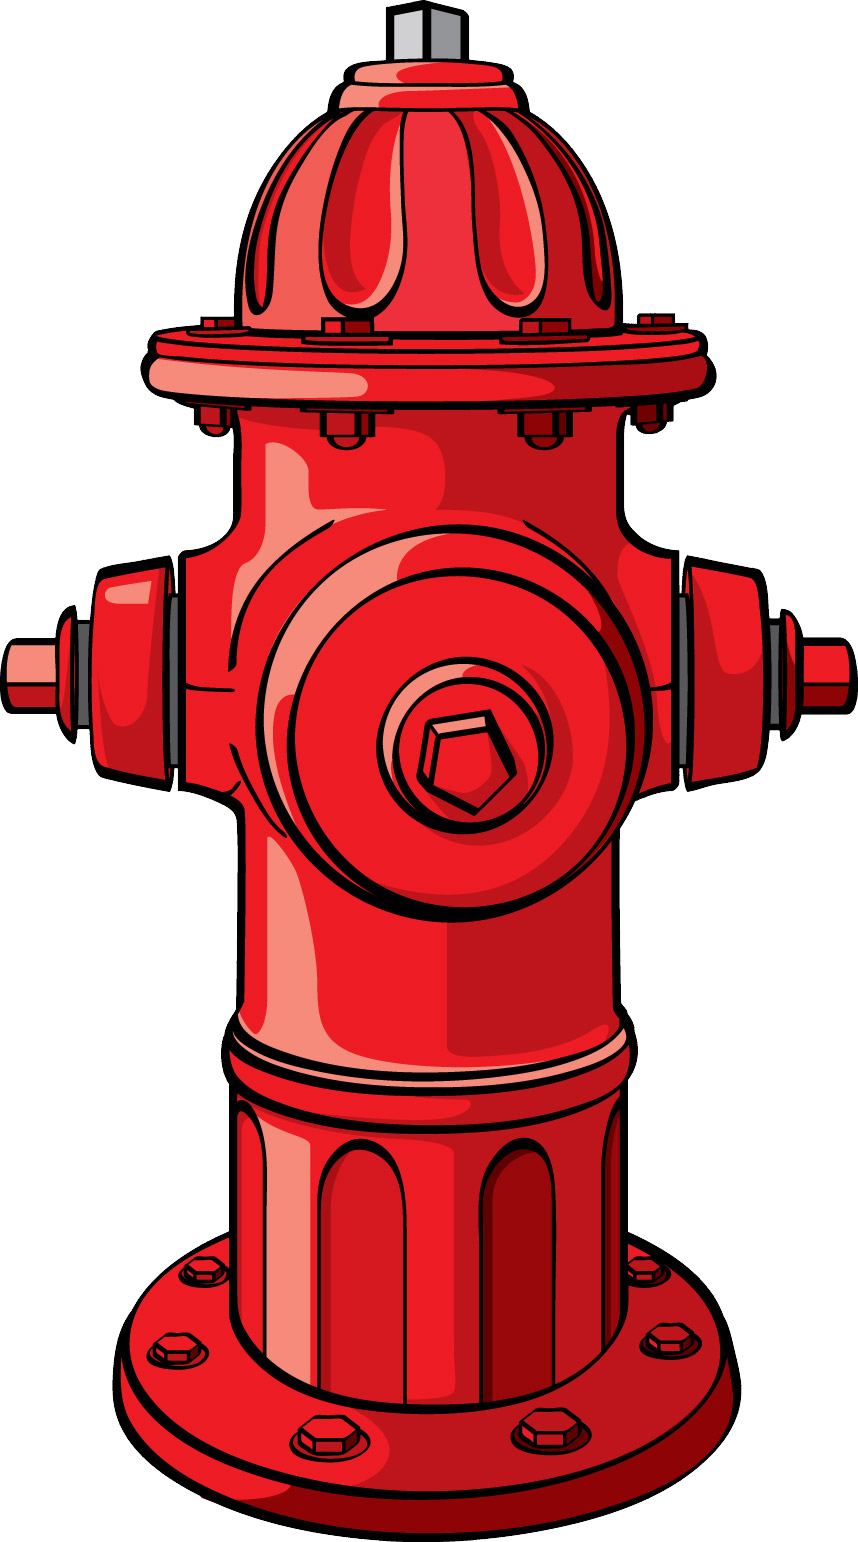 Fire Hydrant Safety Systems